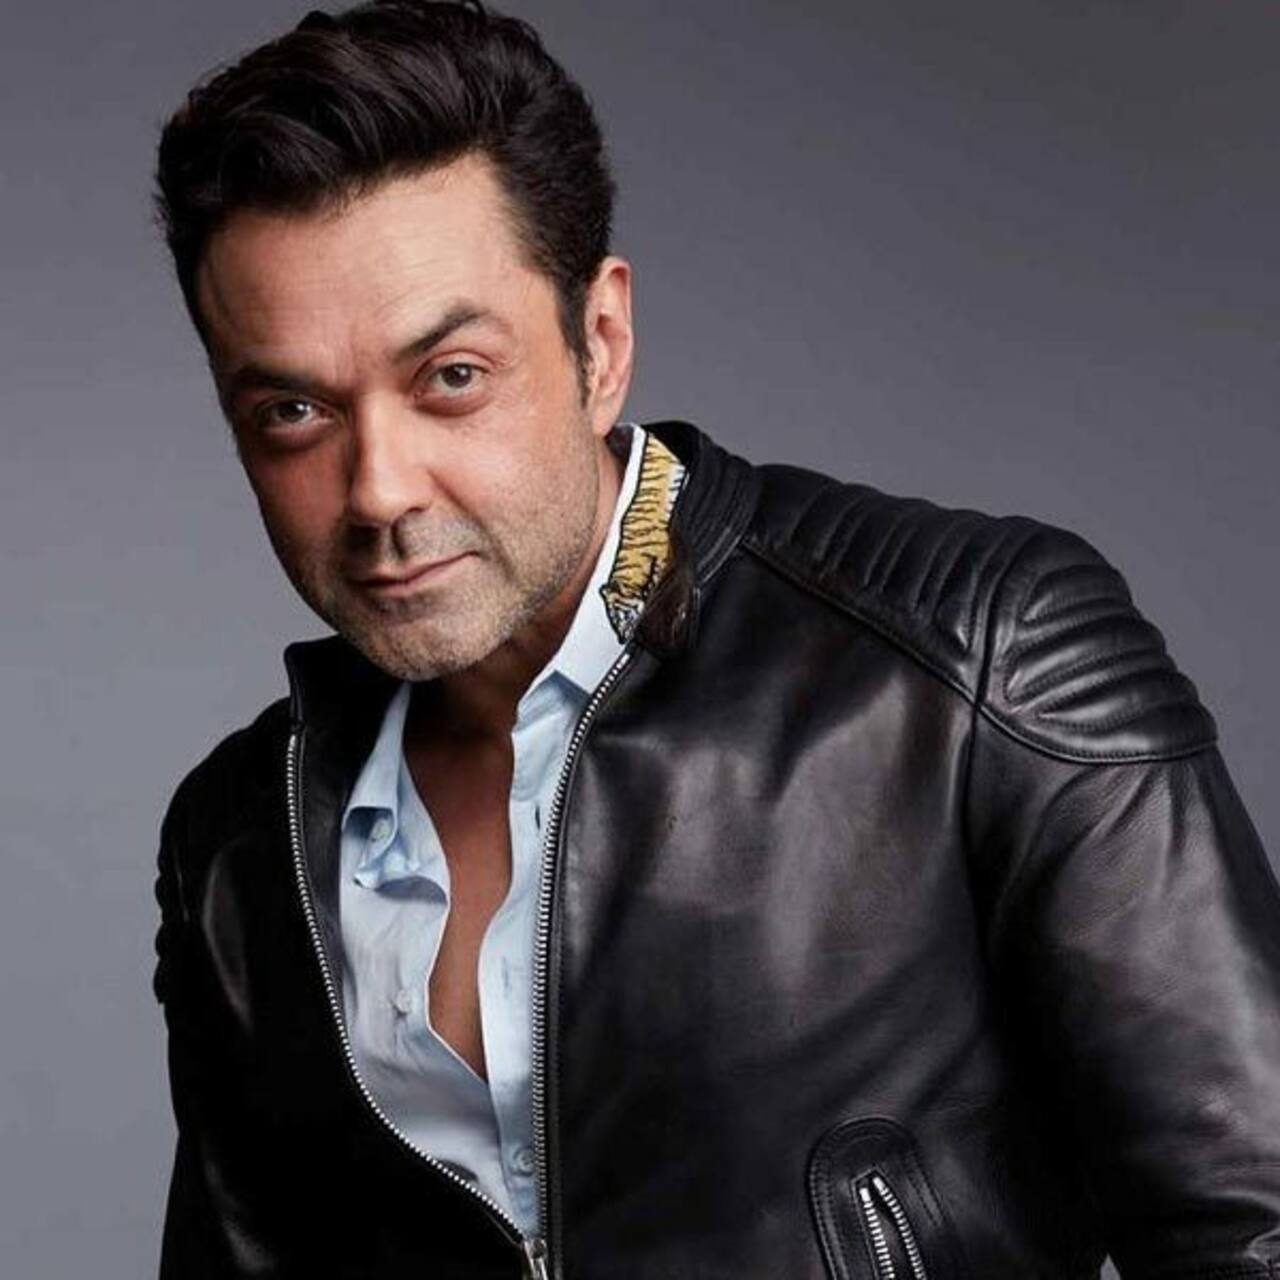 Bobby Deol was the first choice fot these films